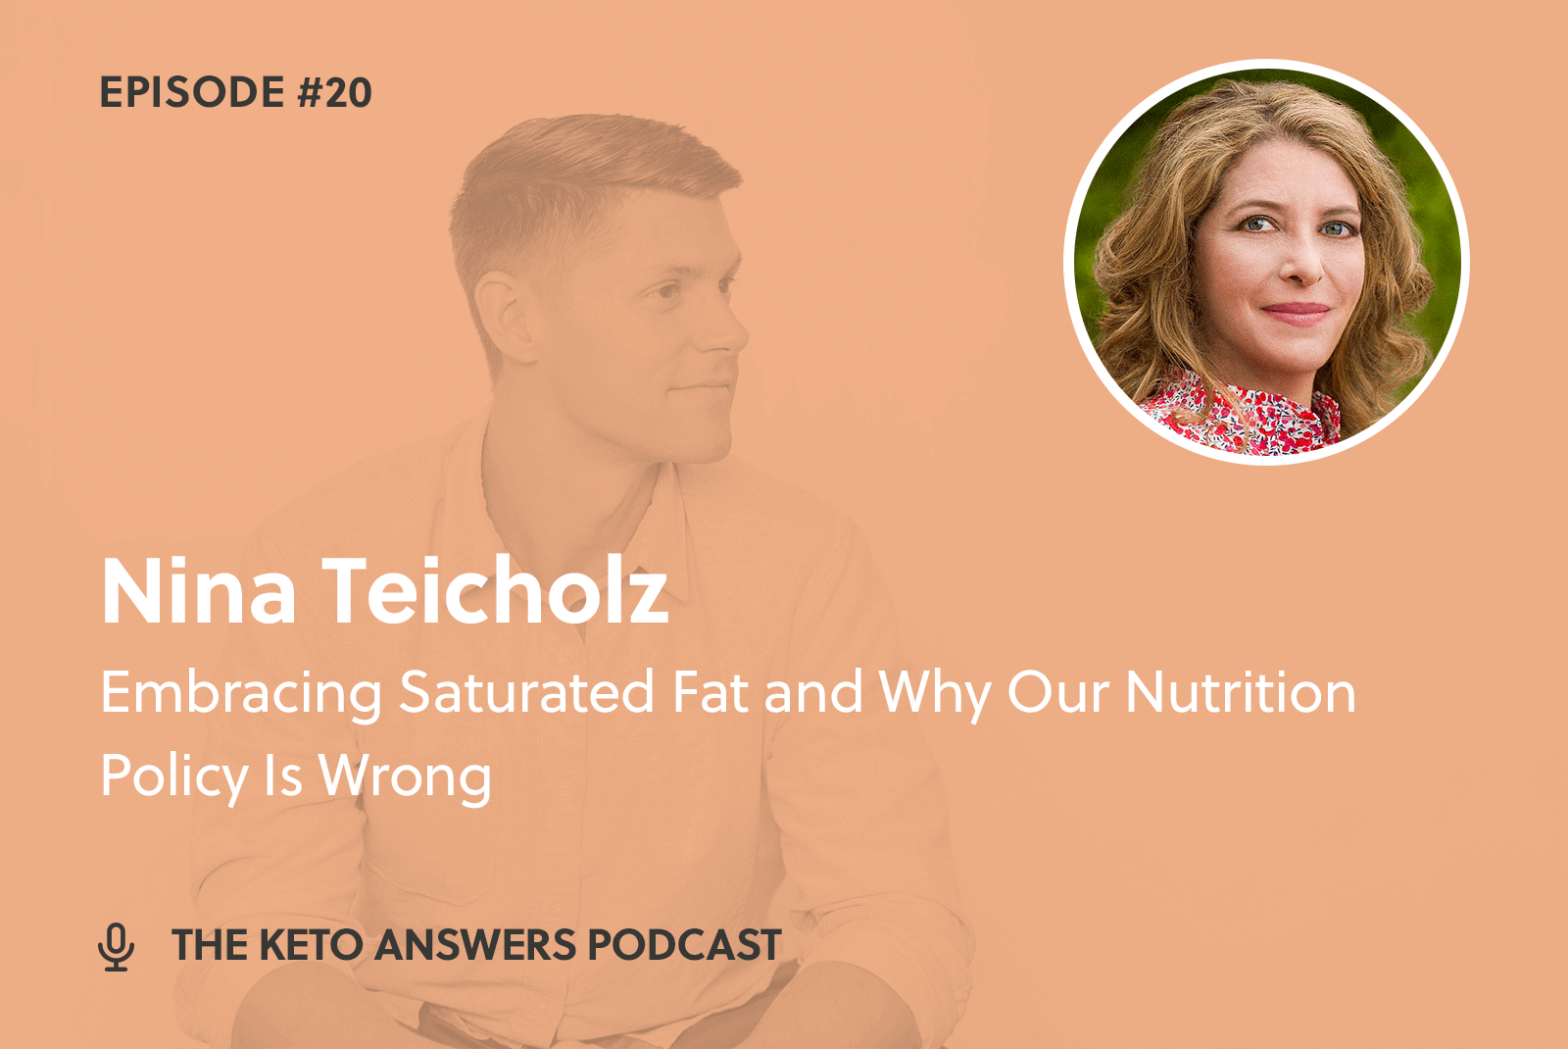 020: Embracing Saturated Fat and Why Our Nutrition Policy Is Wrong - Nina Teicholz